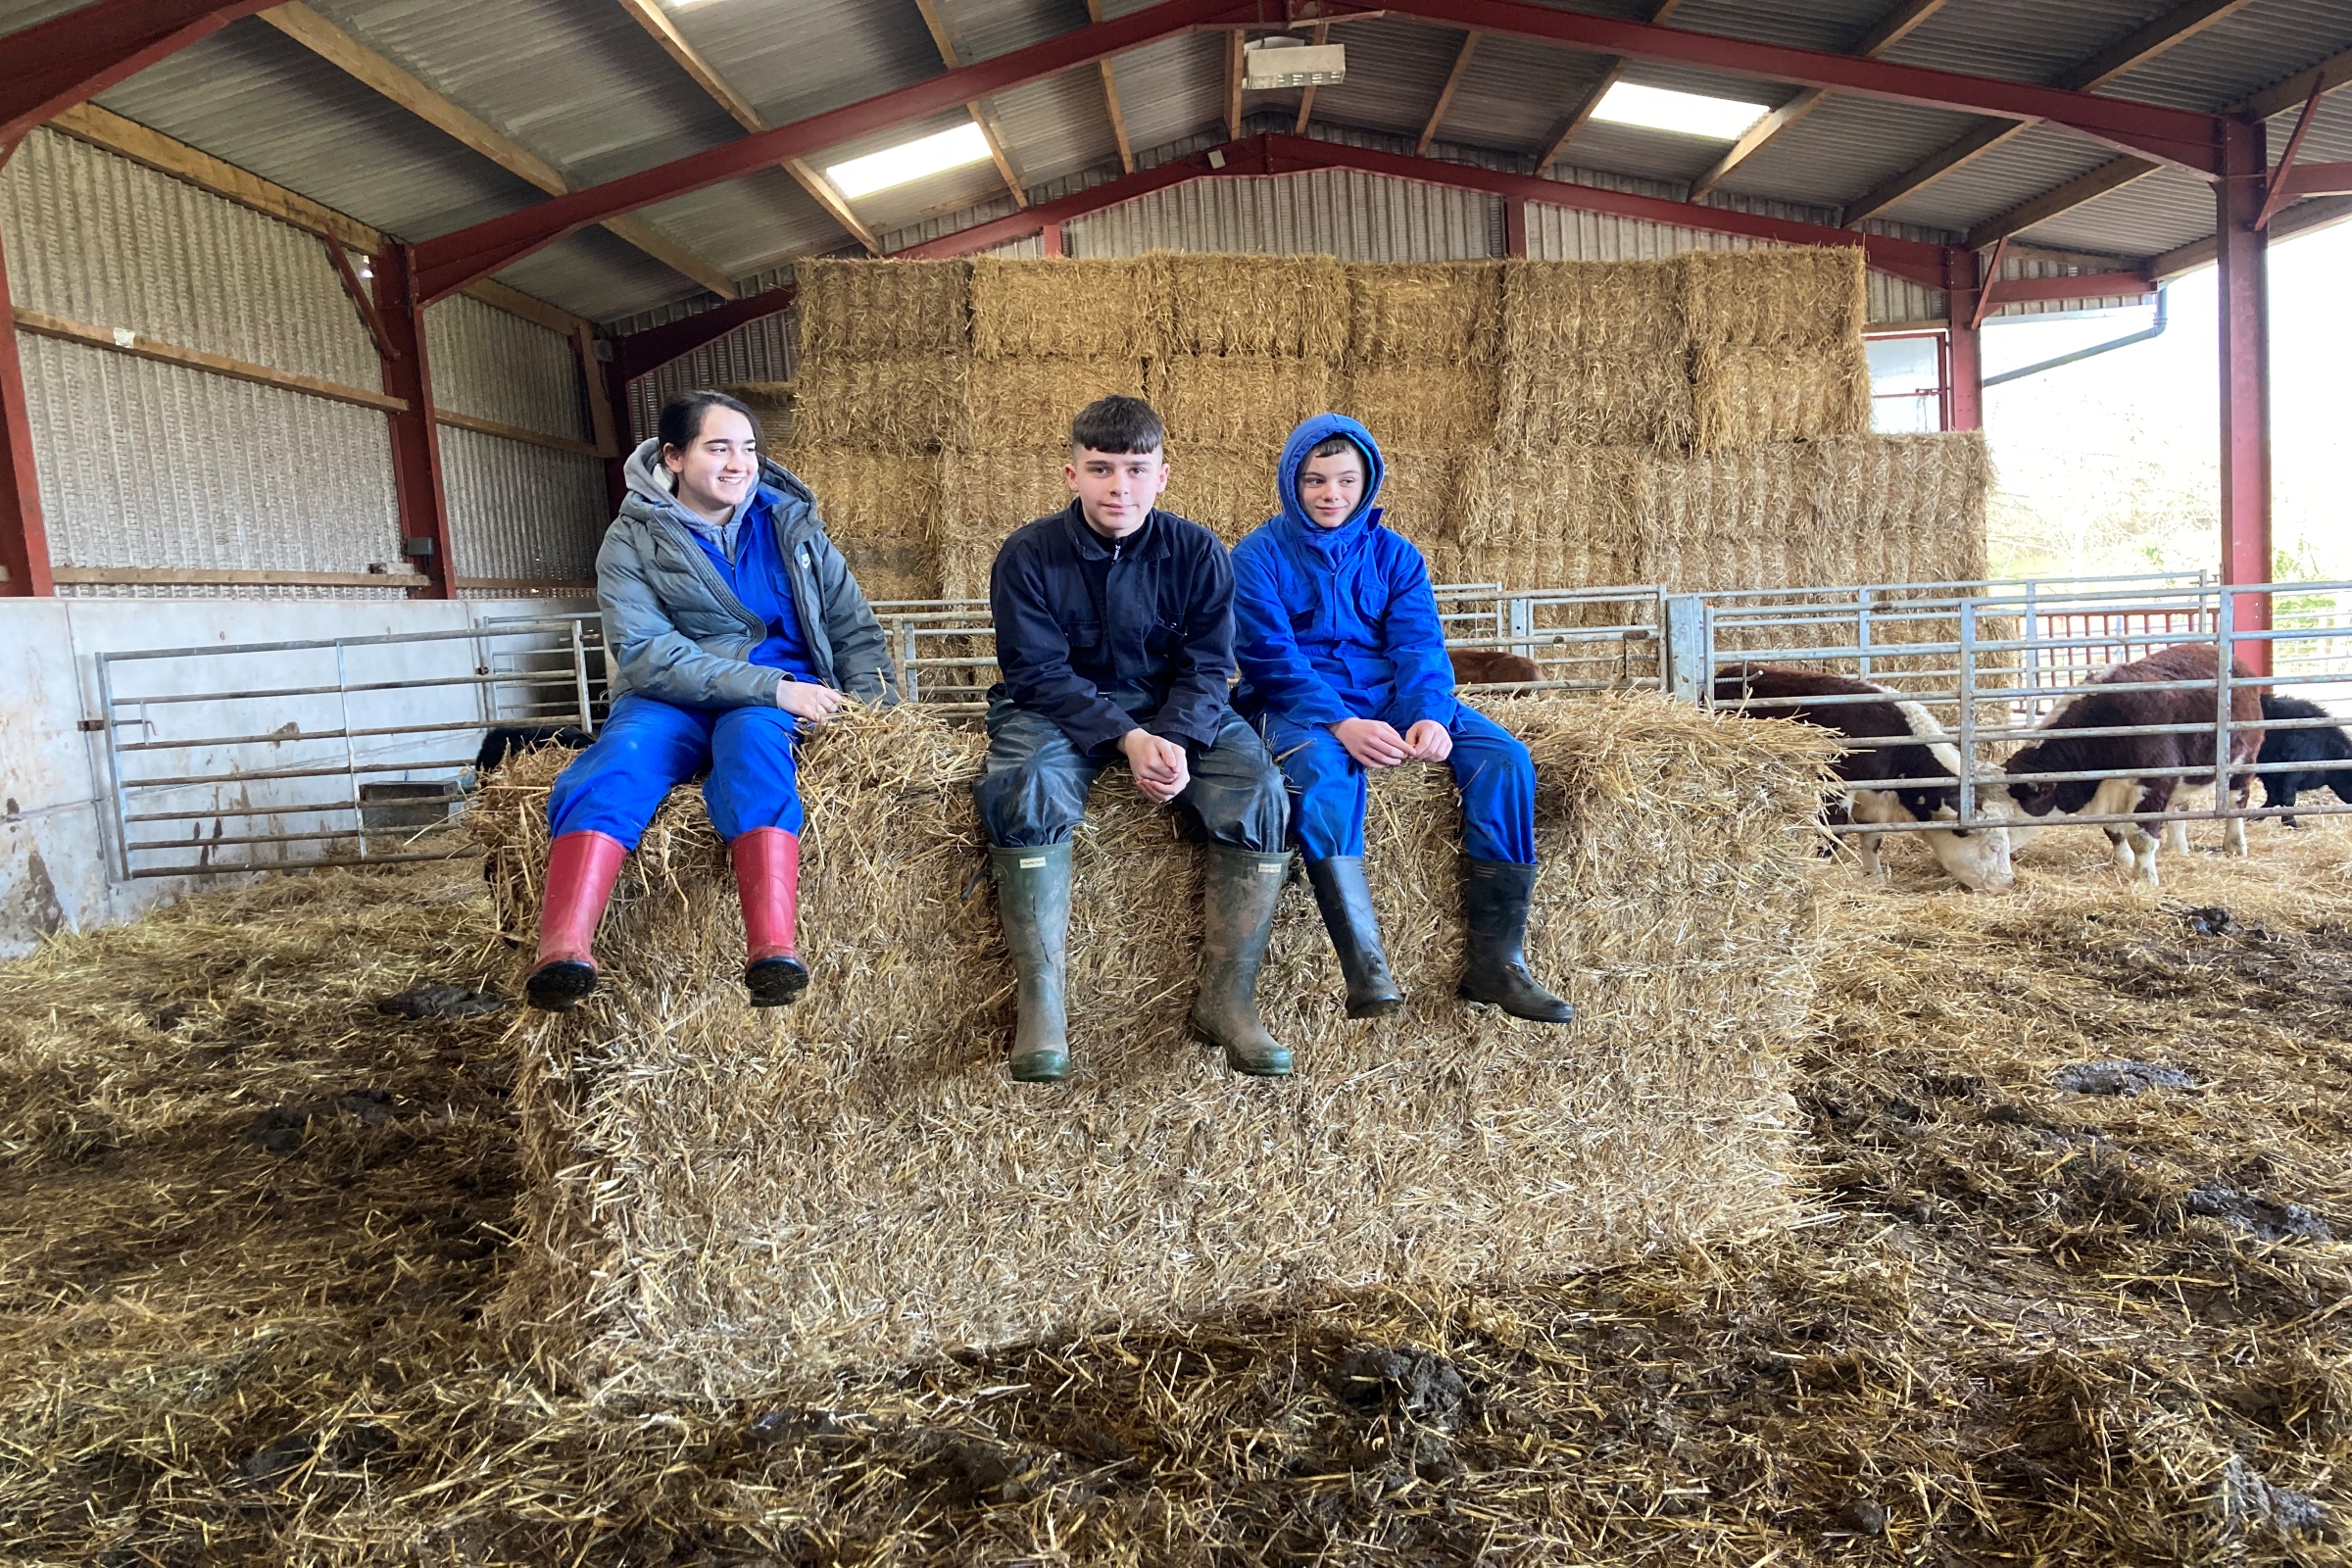 three young people sat on a hay bale